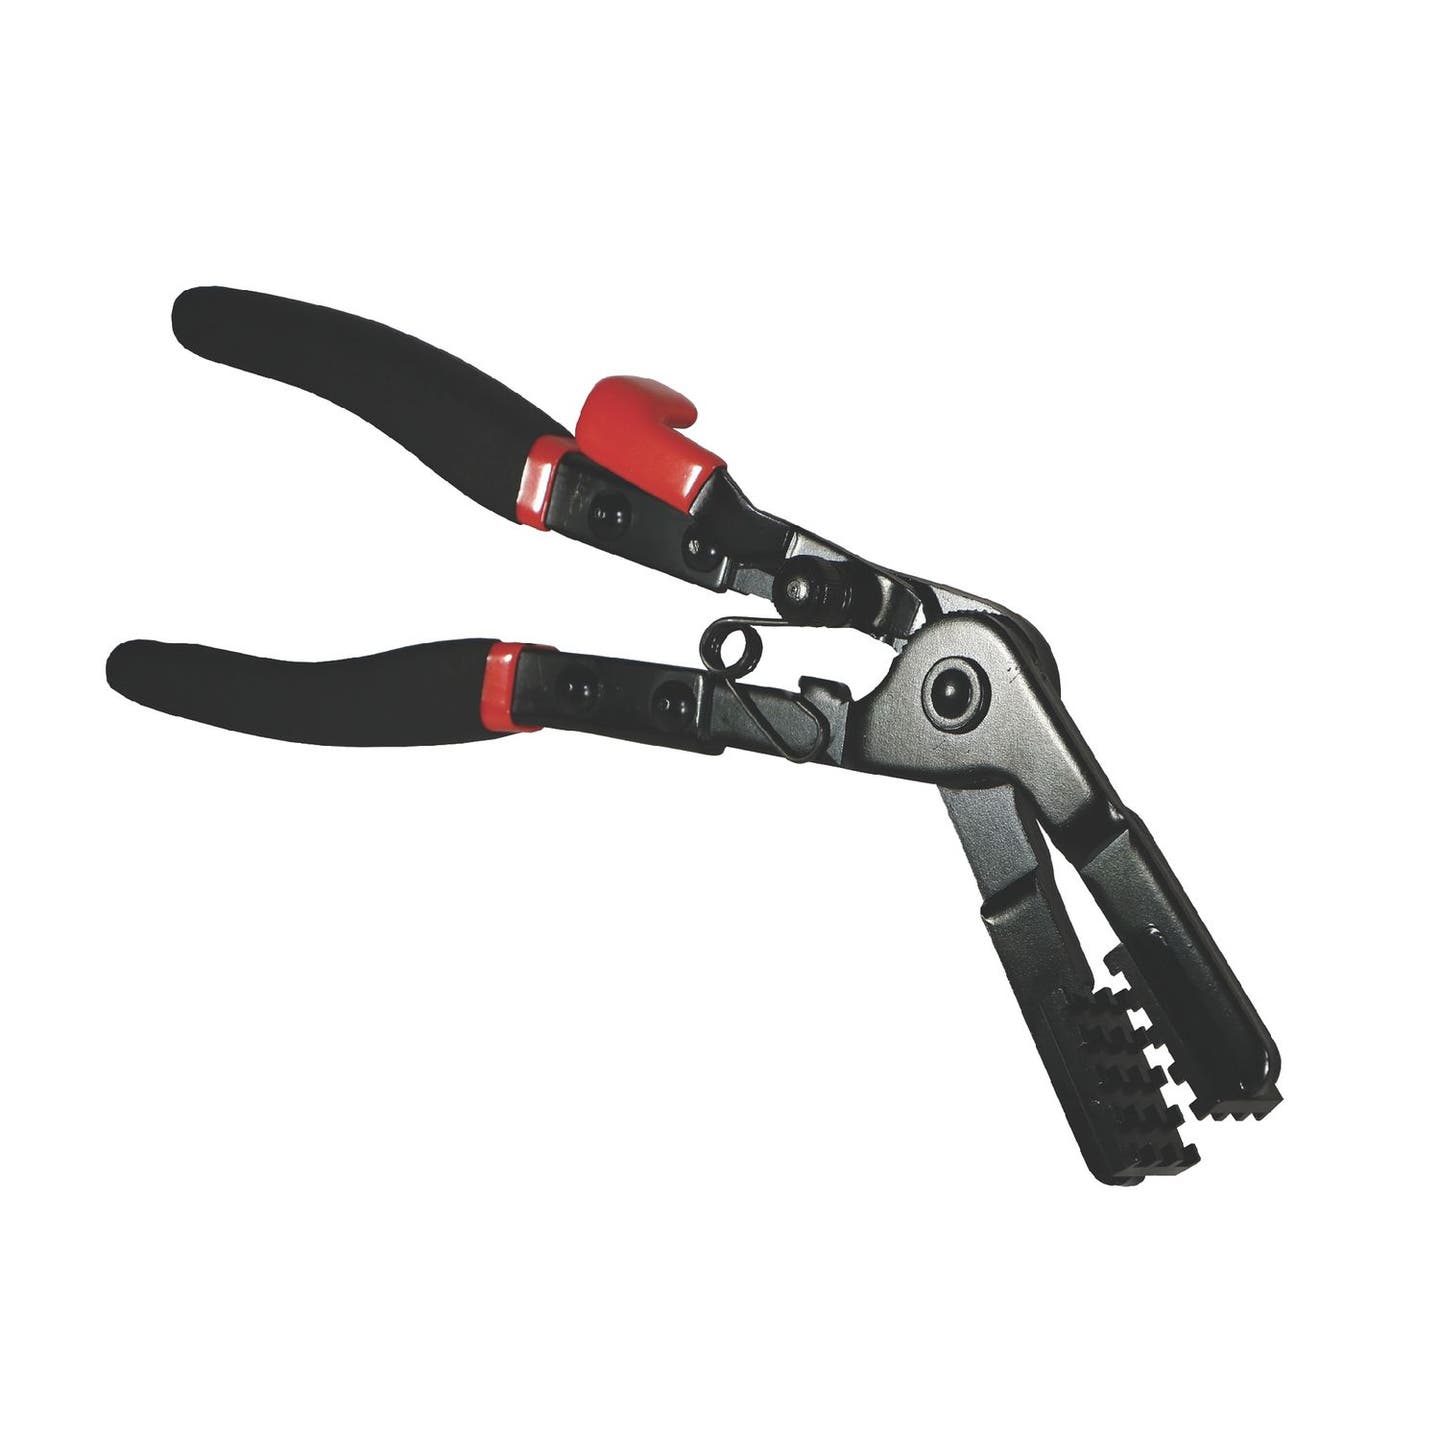 ANGLED UNIVERSAL HOSE CLAMP PLIERS